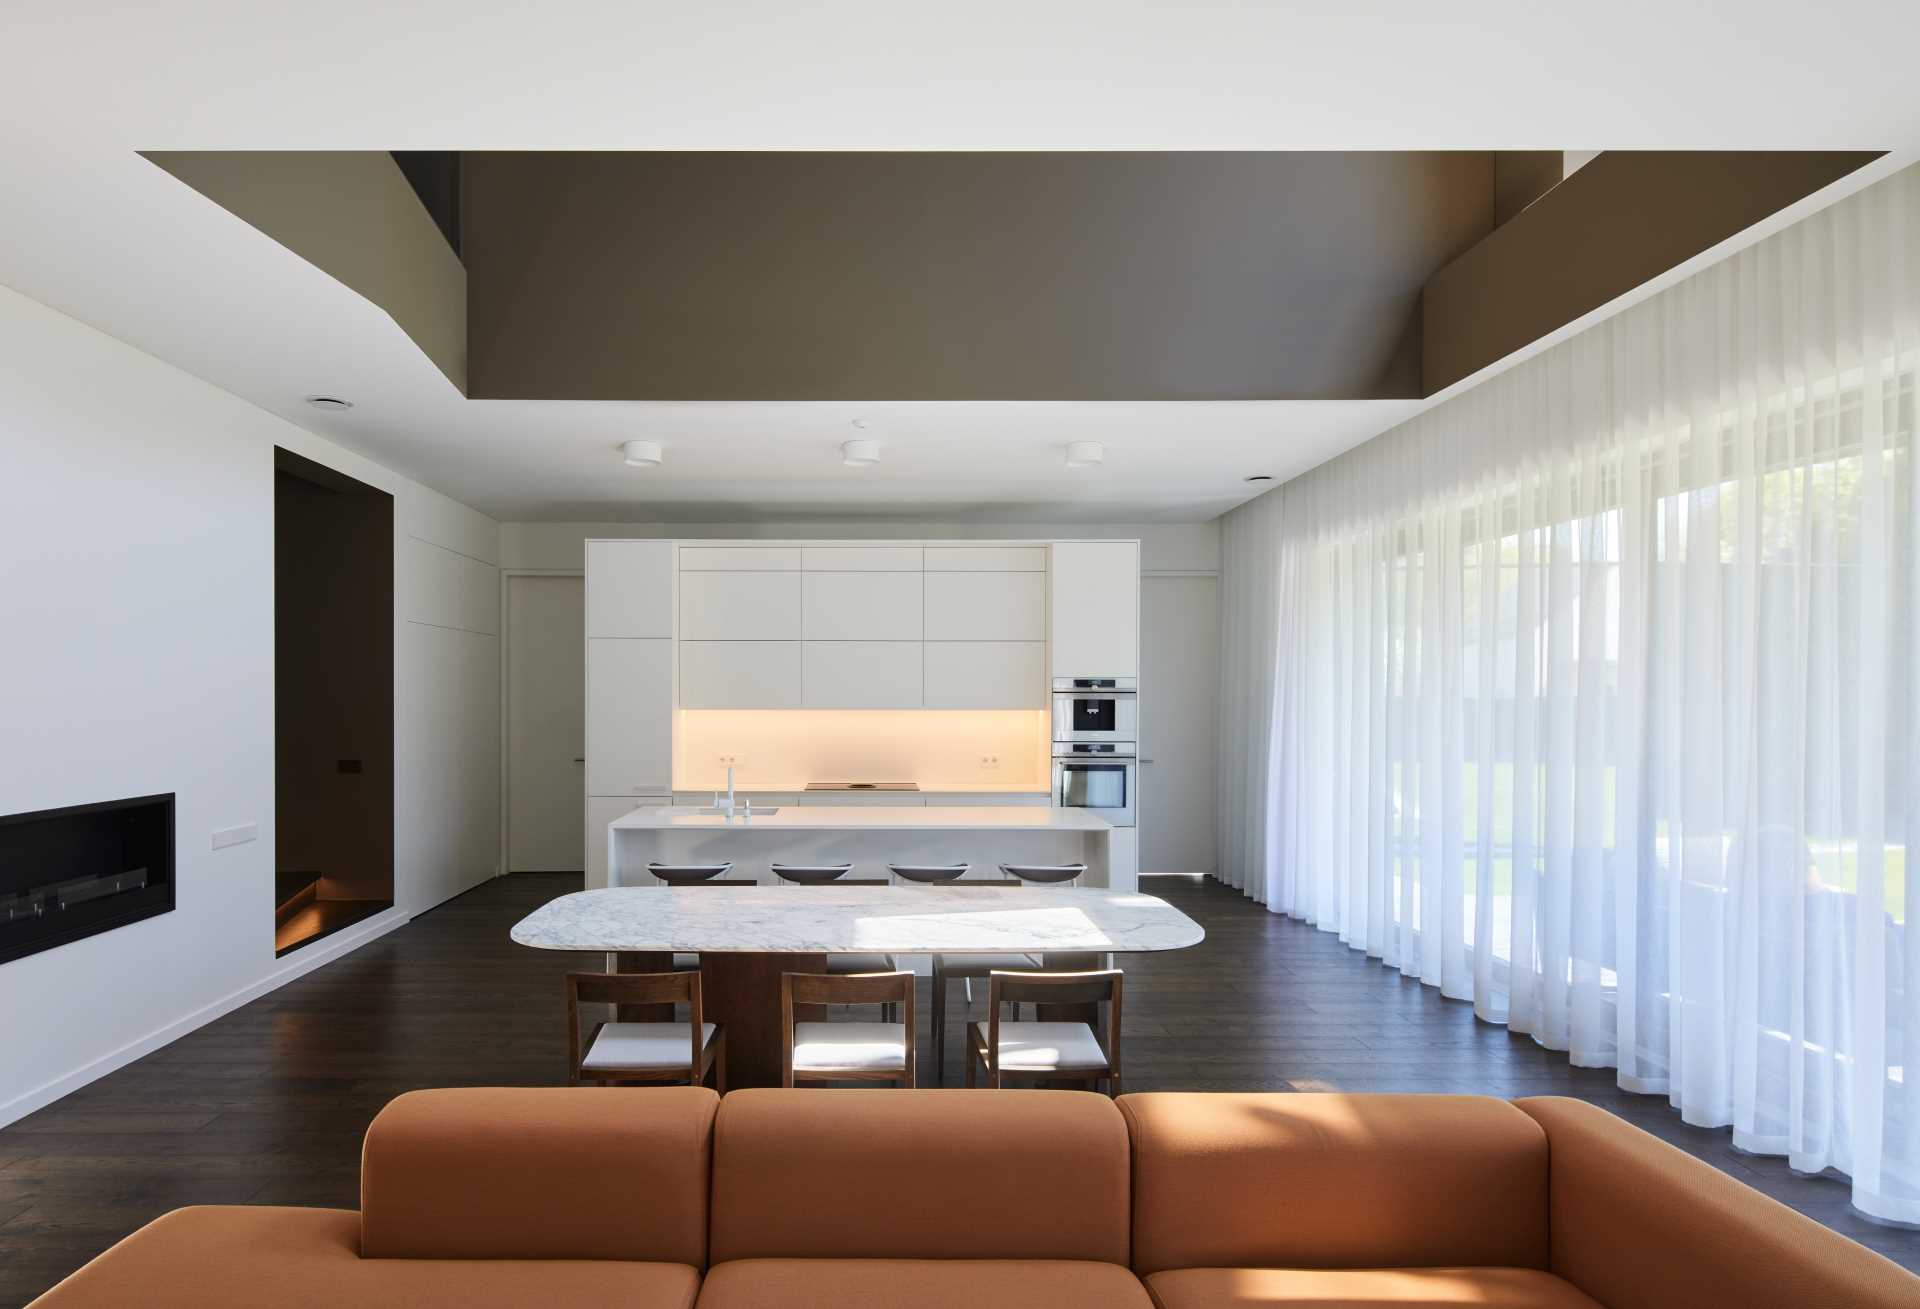 A modern home interior with an open plan living room, dining area, and white kitchen.